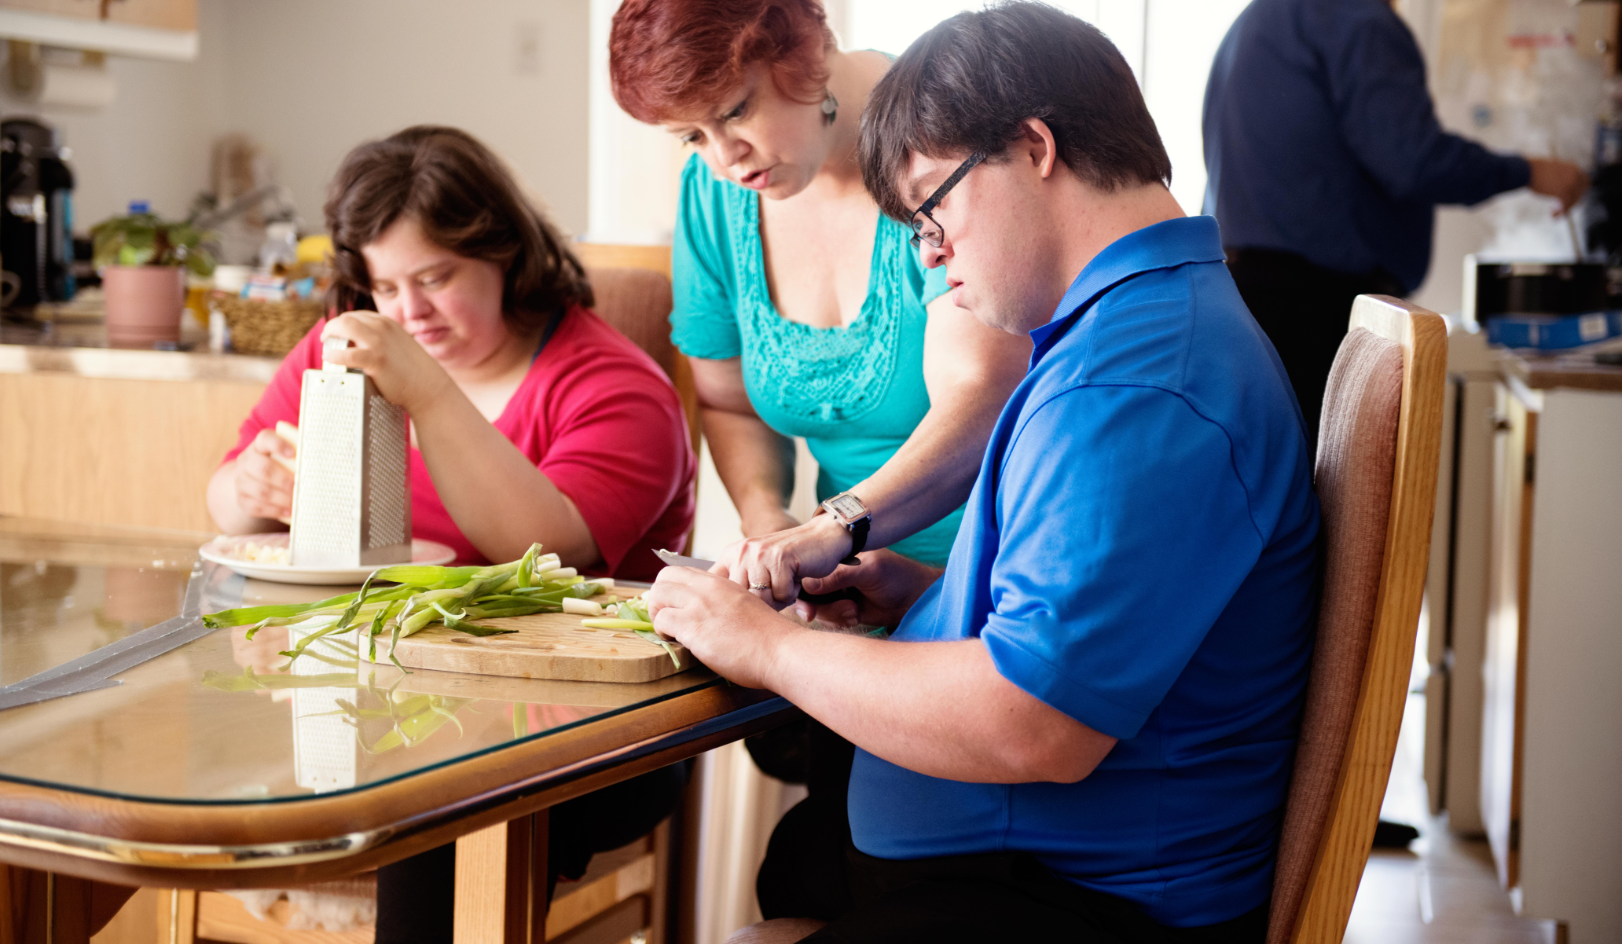 A middle aged woman helping two young adults seated at a kitchen table chop food.